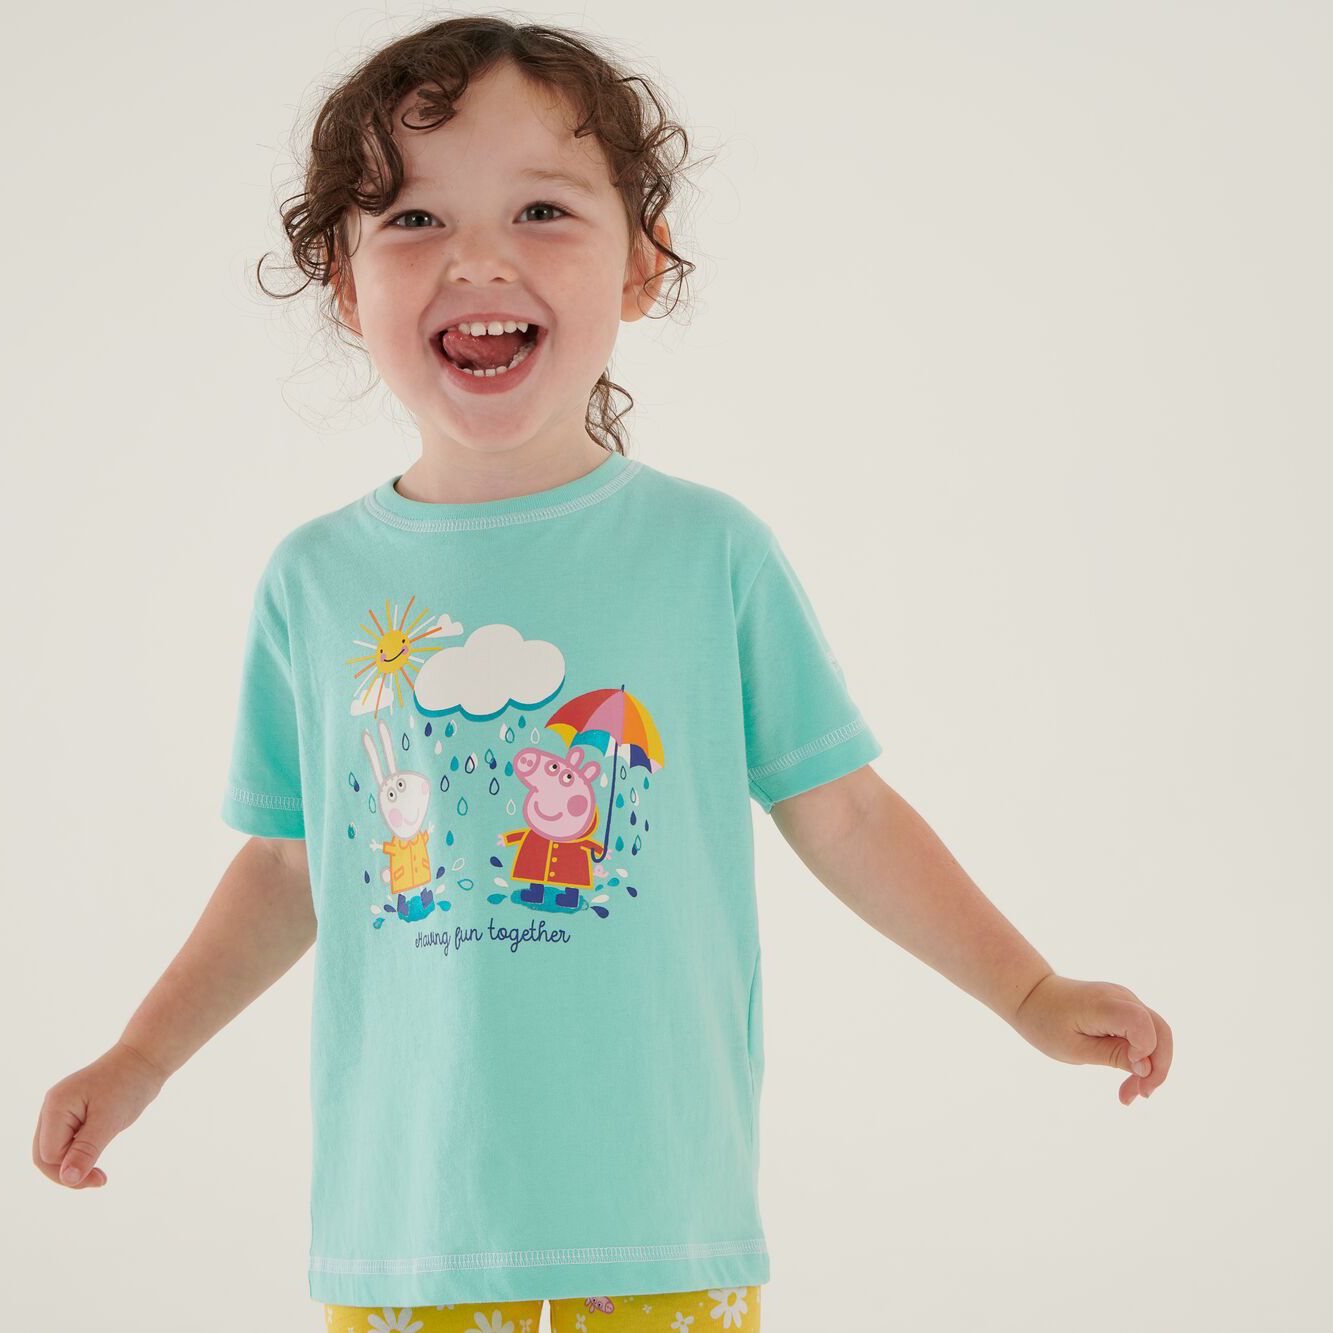 Material: Cotton, Polyester. Fabric: Coolweave, Jersey. Design: Logo, Printed, Text. Characters: Peppa Pig. Neckline: Round Neck. Sleeve-Type: Short-Sleeved. Fabric Technology: Breathable, Lightweight. 100% Officially Licensed. 160gsm.